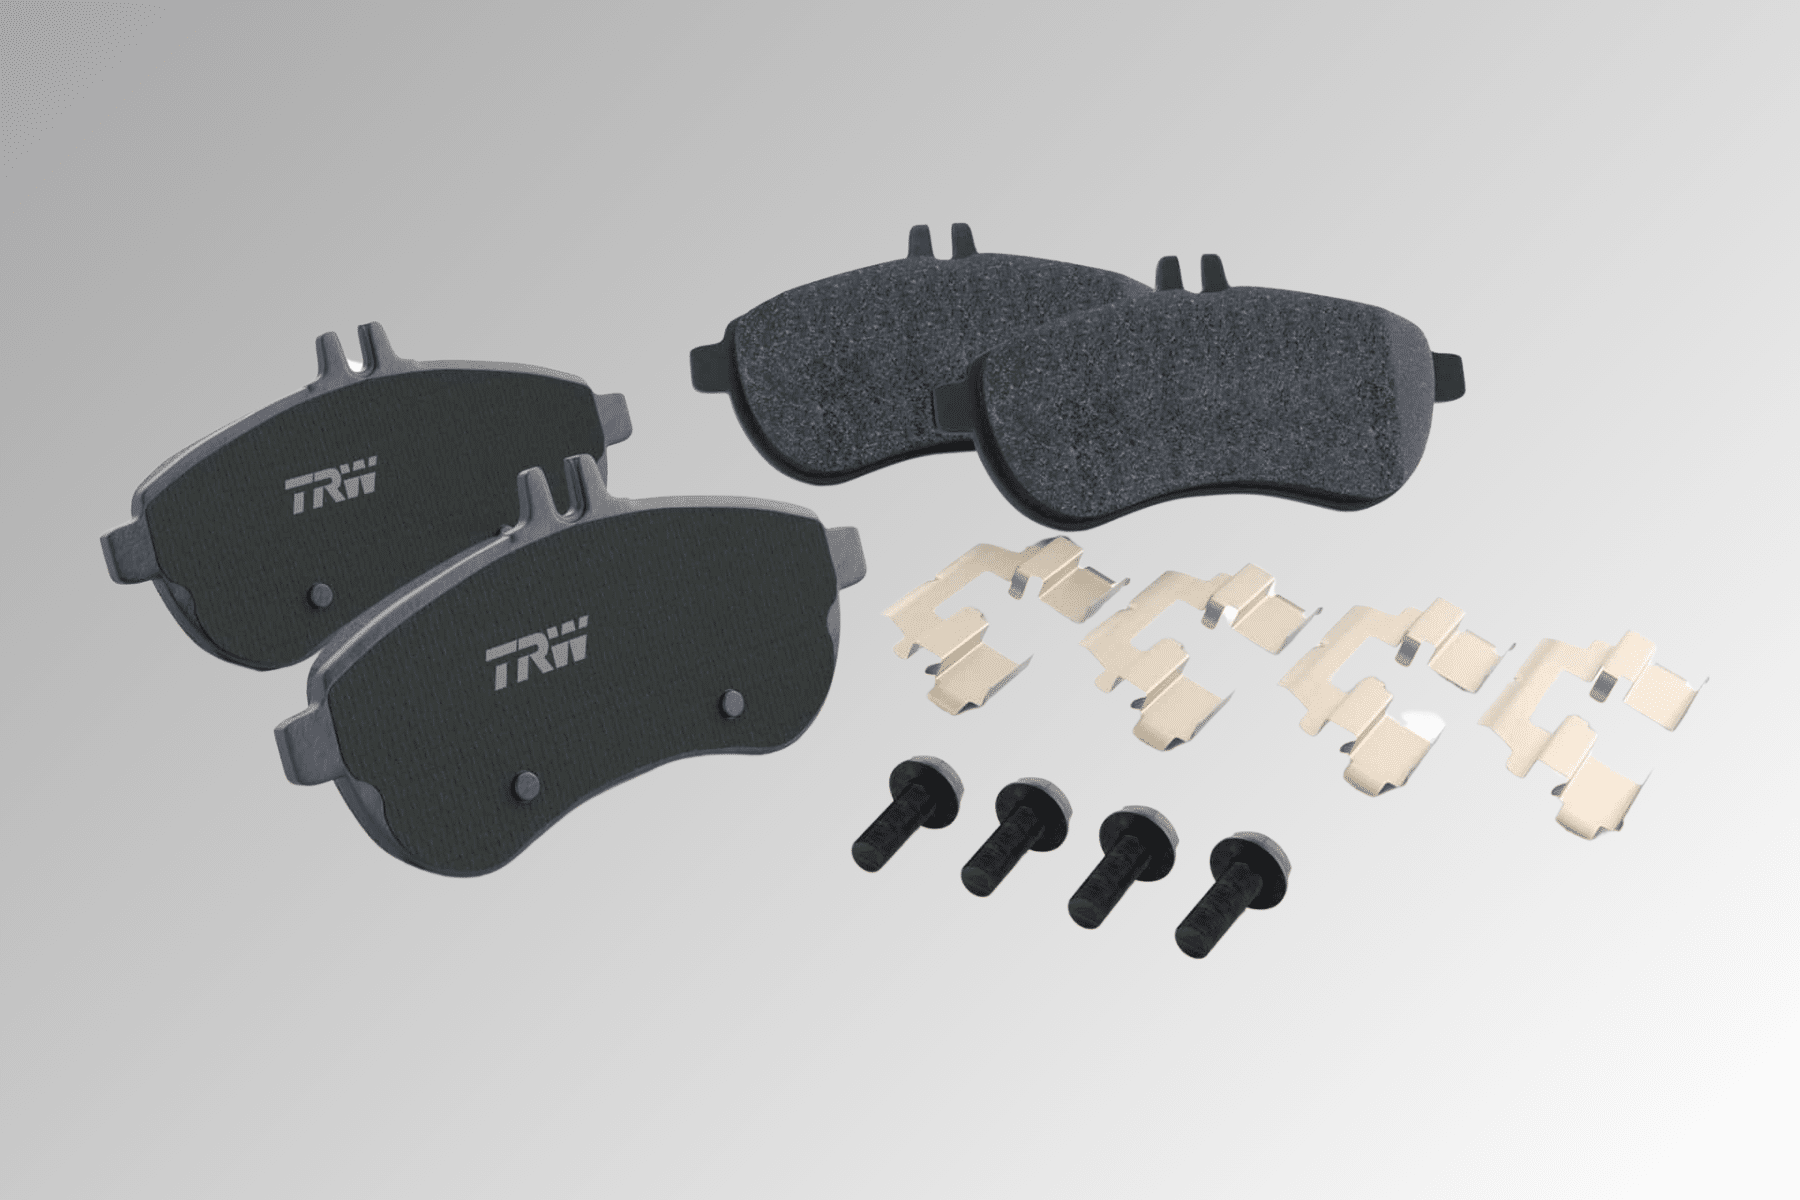 ZF Aftermarket added TRW brake pads to its range